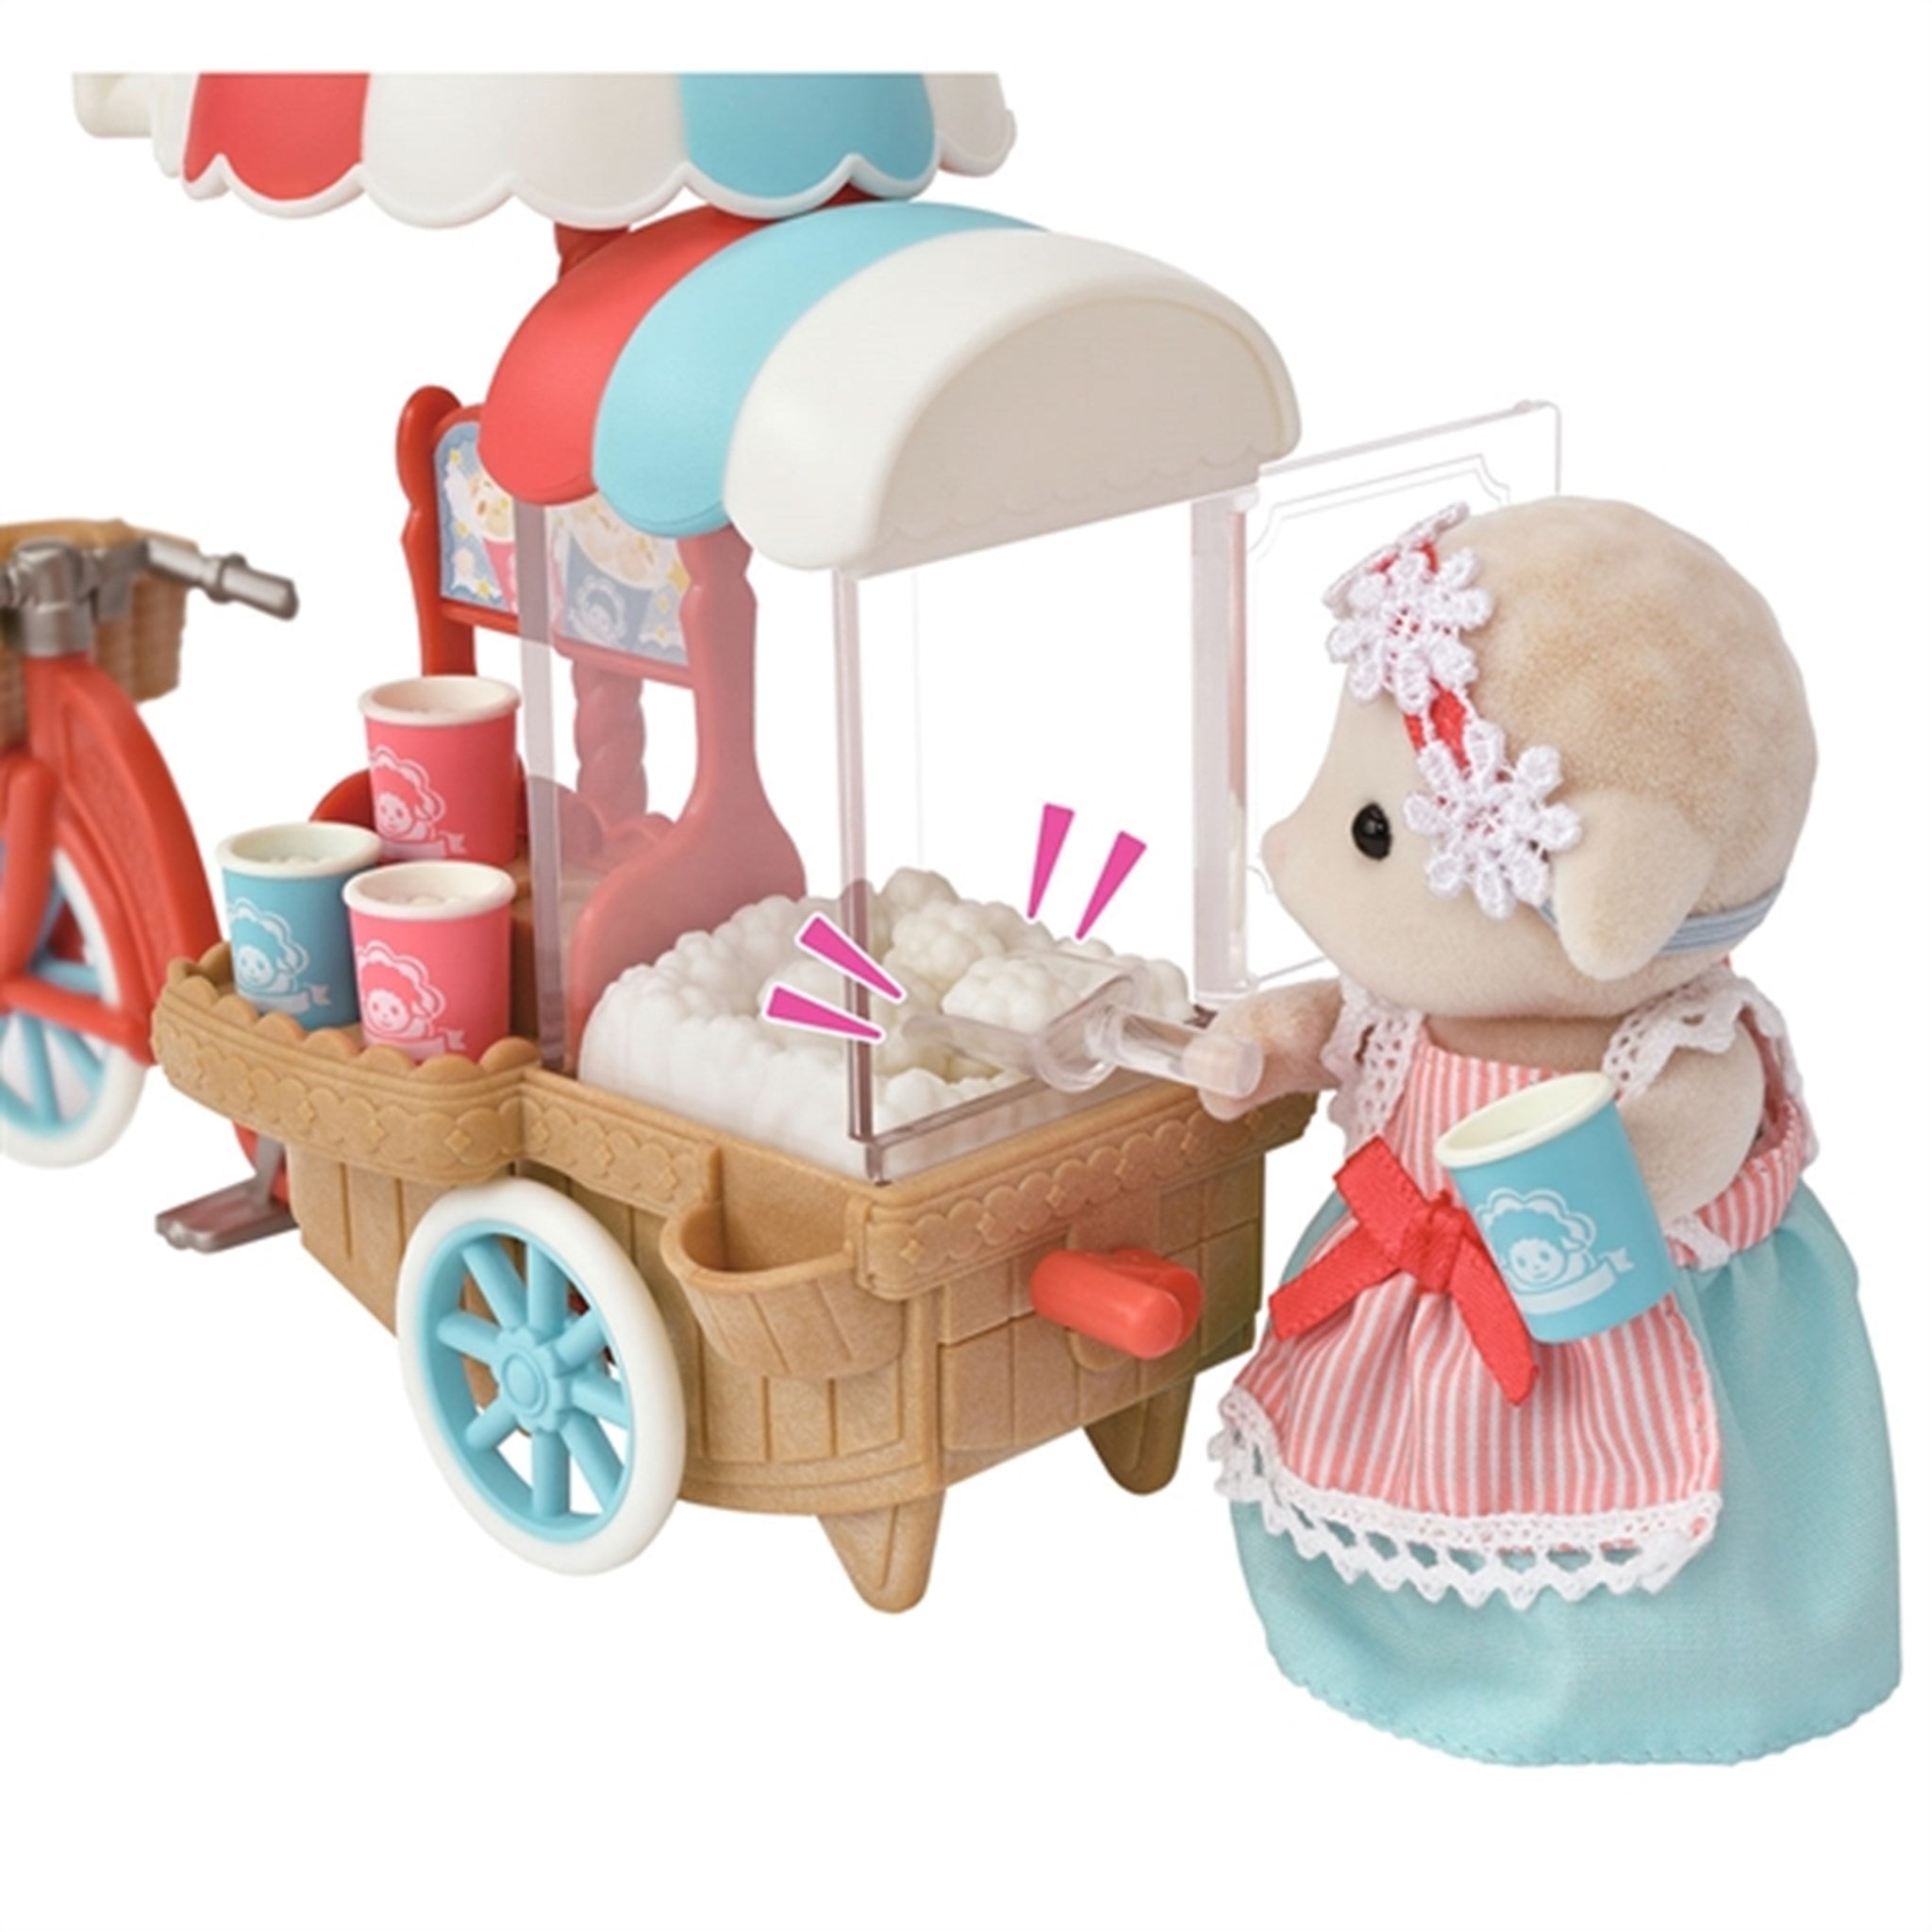 Sylvanian Families® Popcorn Delivery Service With Figur 4